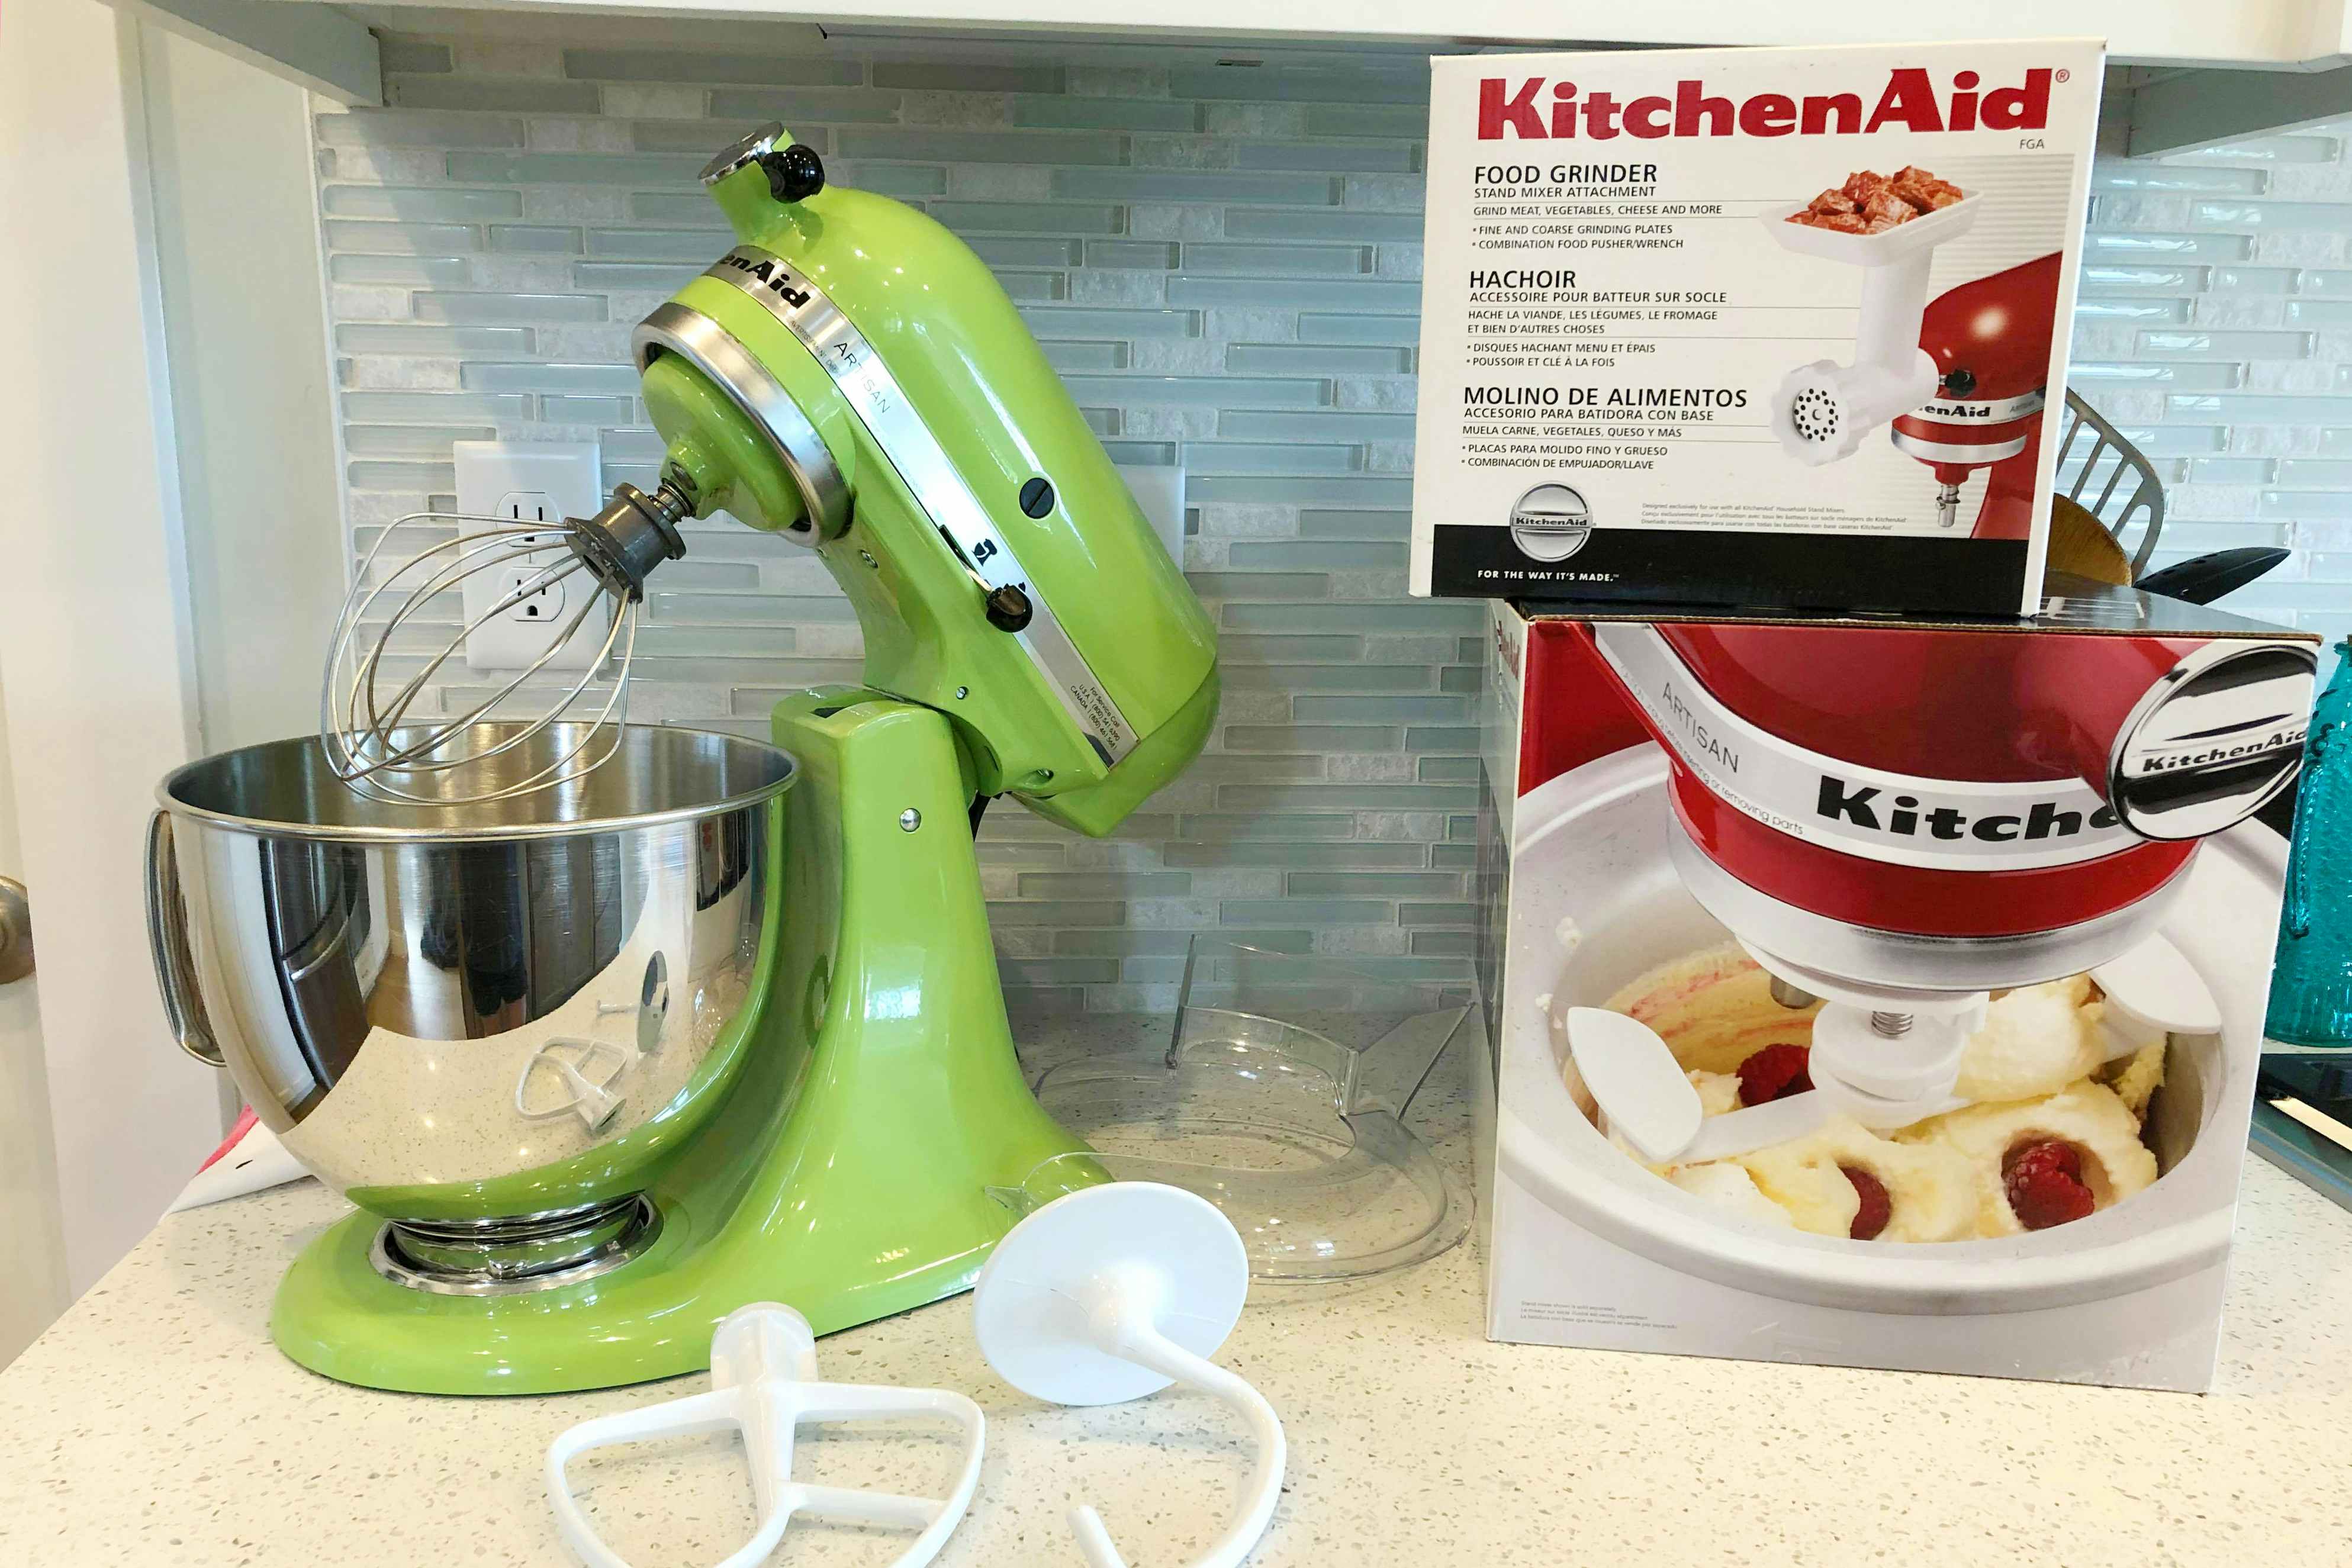 KitchenAid brand white coated stand mixer paddle: 373 ppm Lead + 7 ppm  Cadmium.